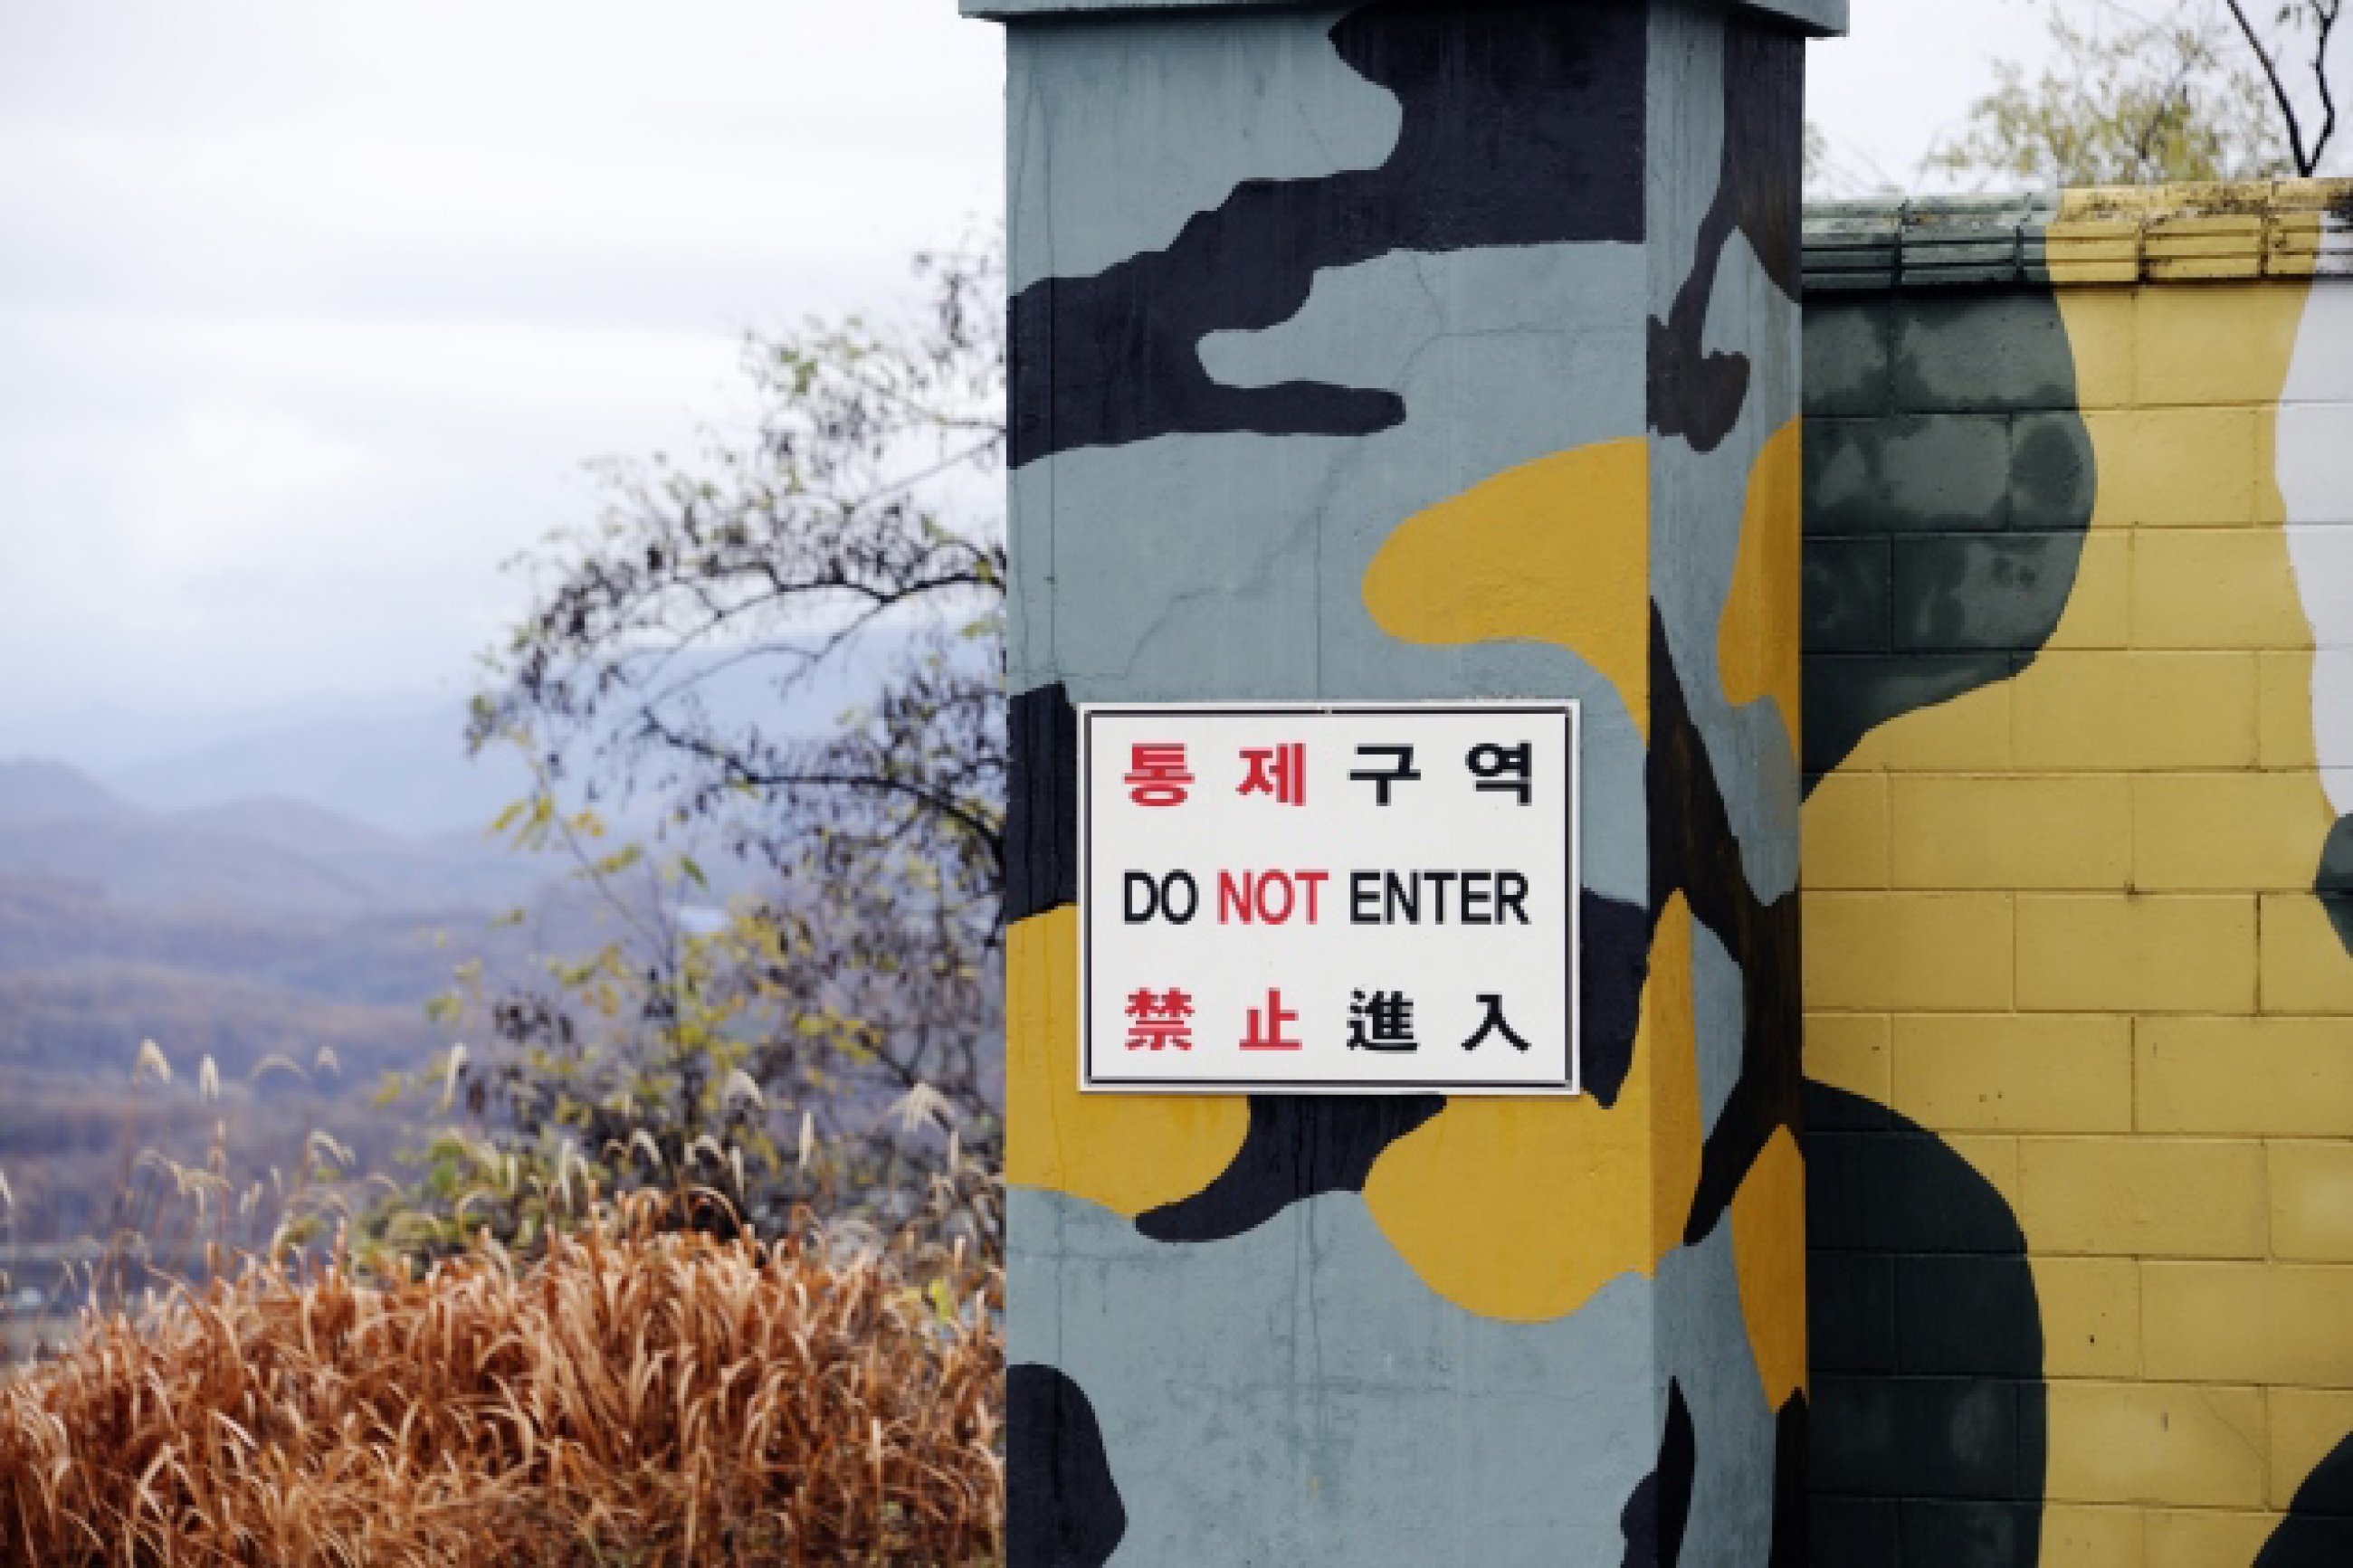 https://bubo.sk/uploads/galleries/7452/south-korean-warning-sign-not-to-enter-at-the-dmz-zone.jpg